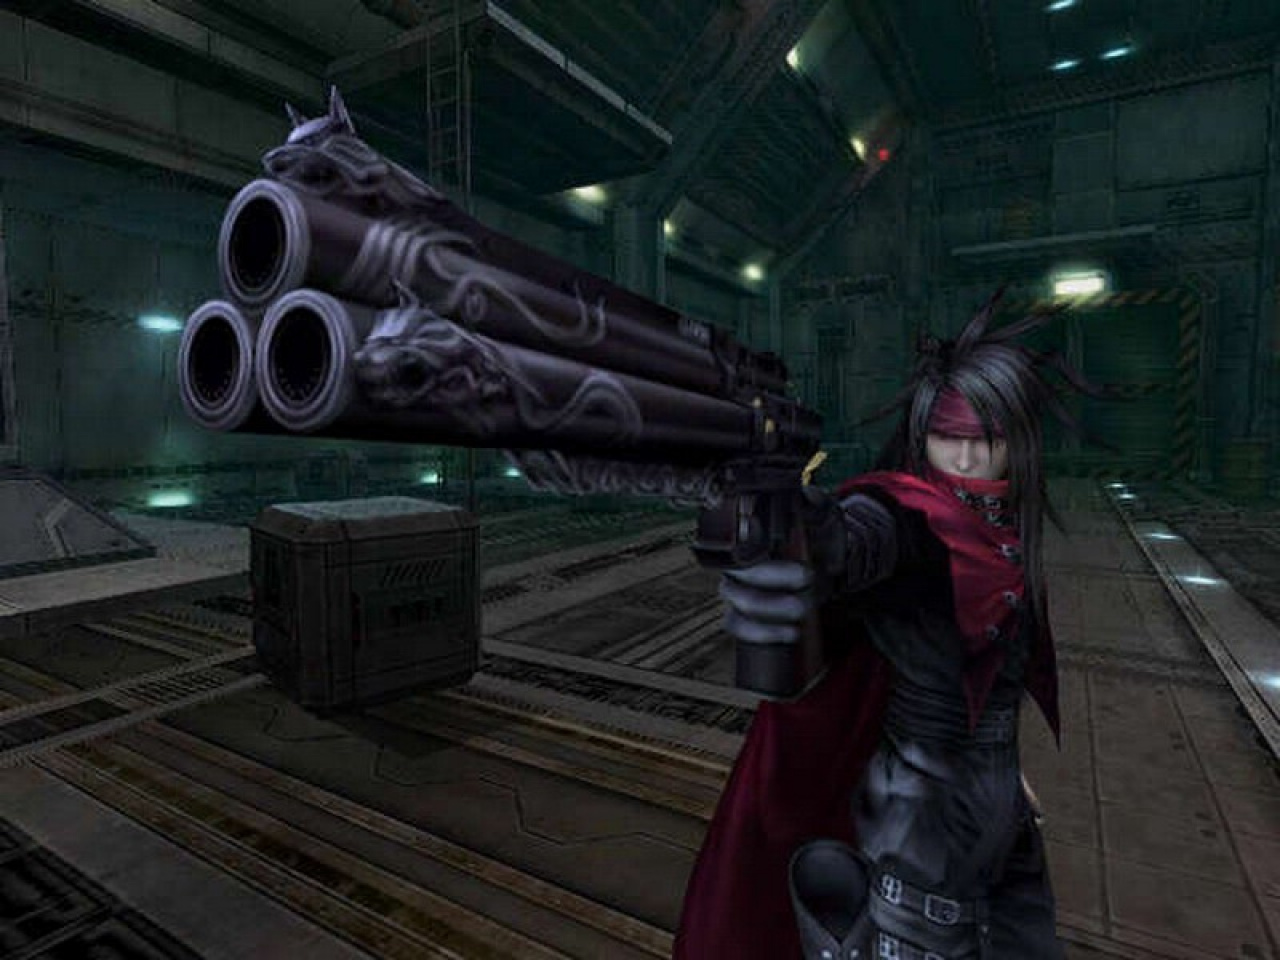 dirge-of-cerberus-final-fantasy-vii-video-game-reviews-and-previews-pc-ps4-xbox-one-and-mobile